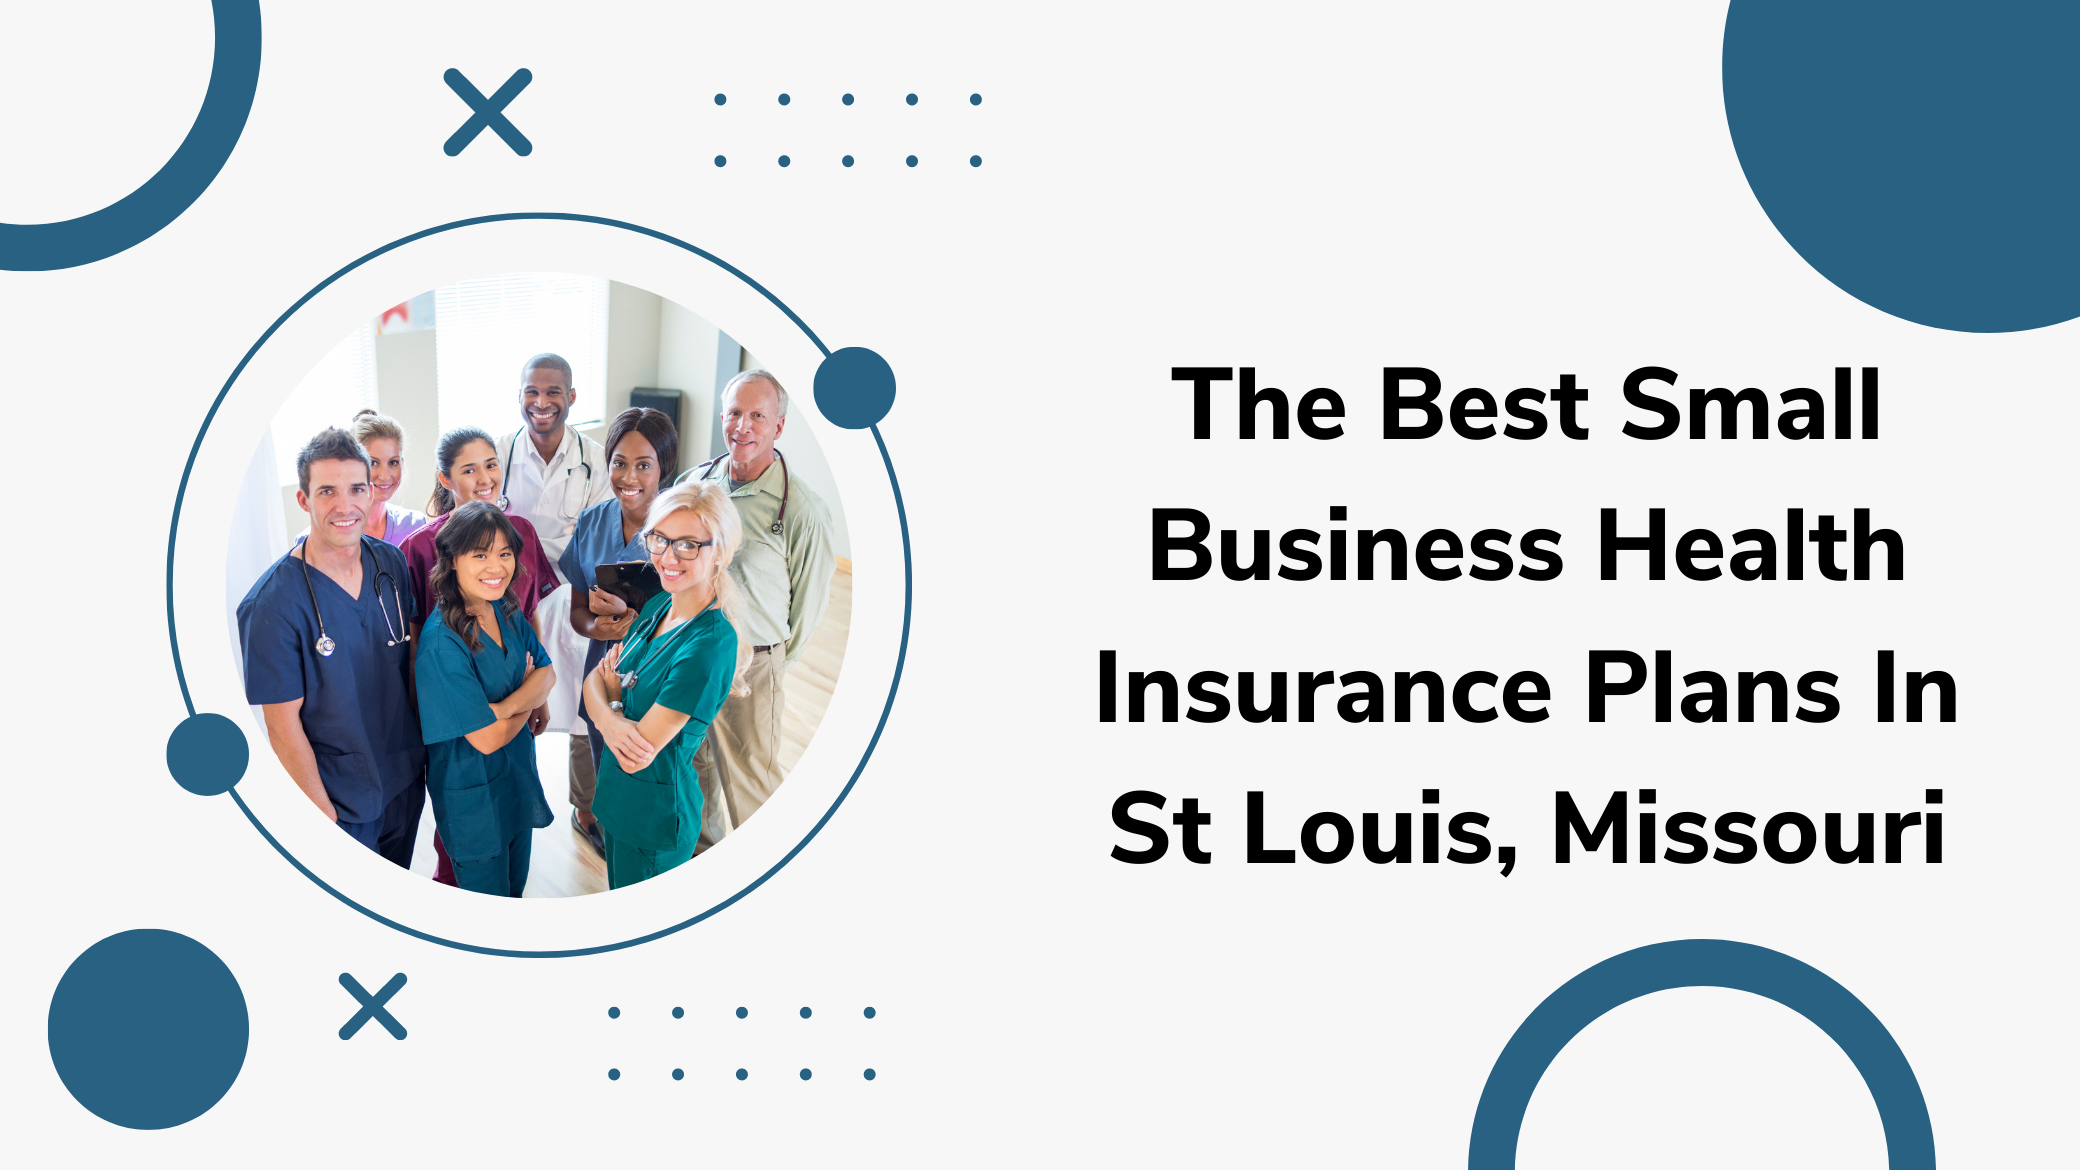 The Best Small Business Health Insurance Plans In St Louis, Missouri